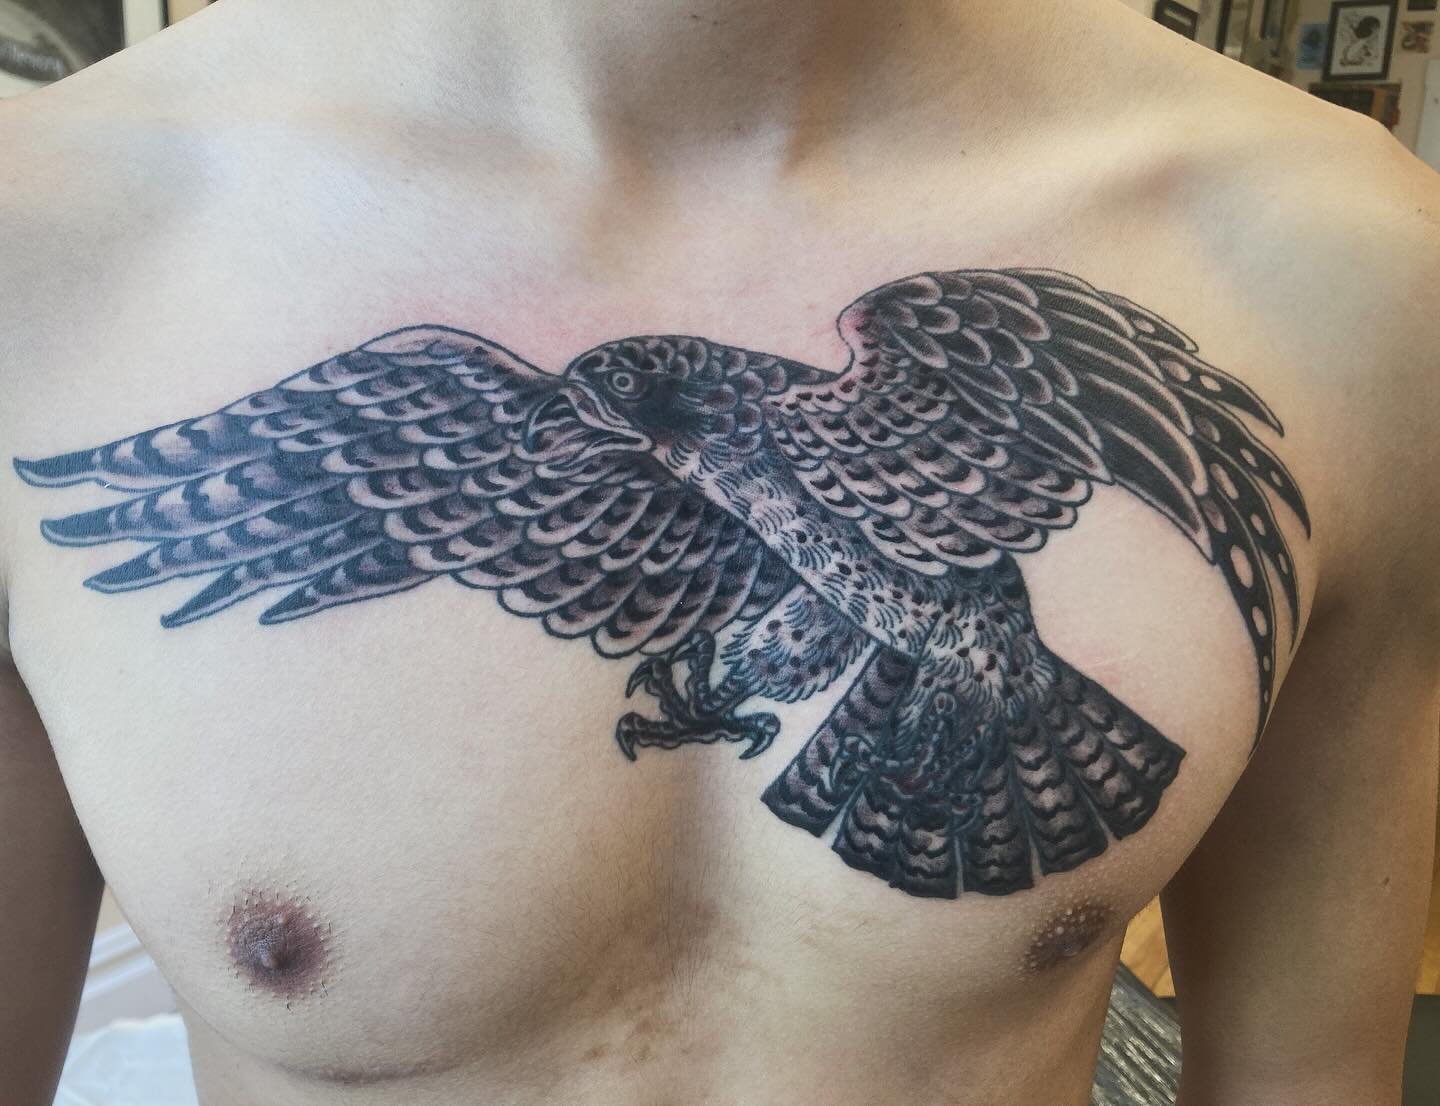 Shaded this falcon @namebrandtattoo today. Good to see you Mateo!